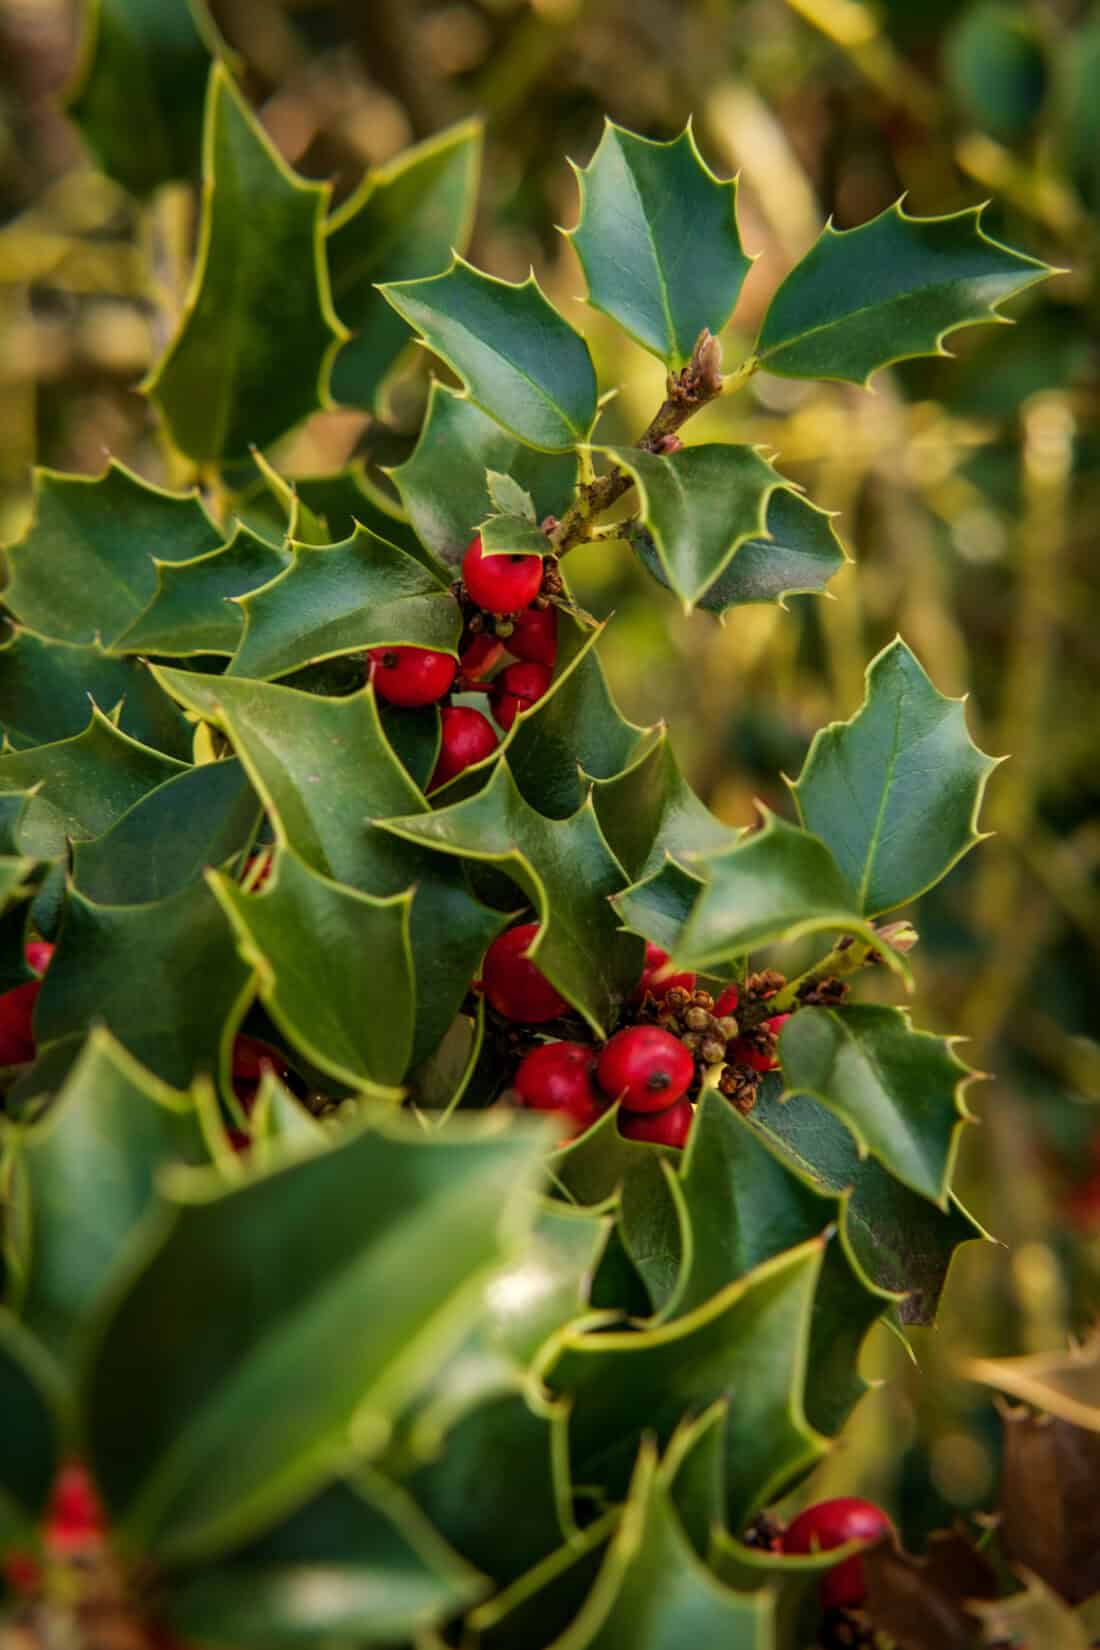 Close-up of an ilex verticillata plant with vibrant green, pointed leaves and clusters of bright red berries. The background is blurred with hints of greenery, emphasizing the detailed texture and color of the holly leaves and berries in the foreground.